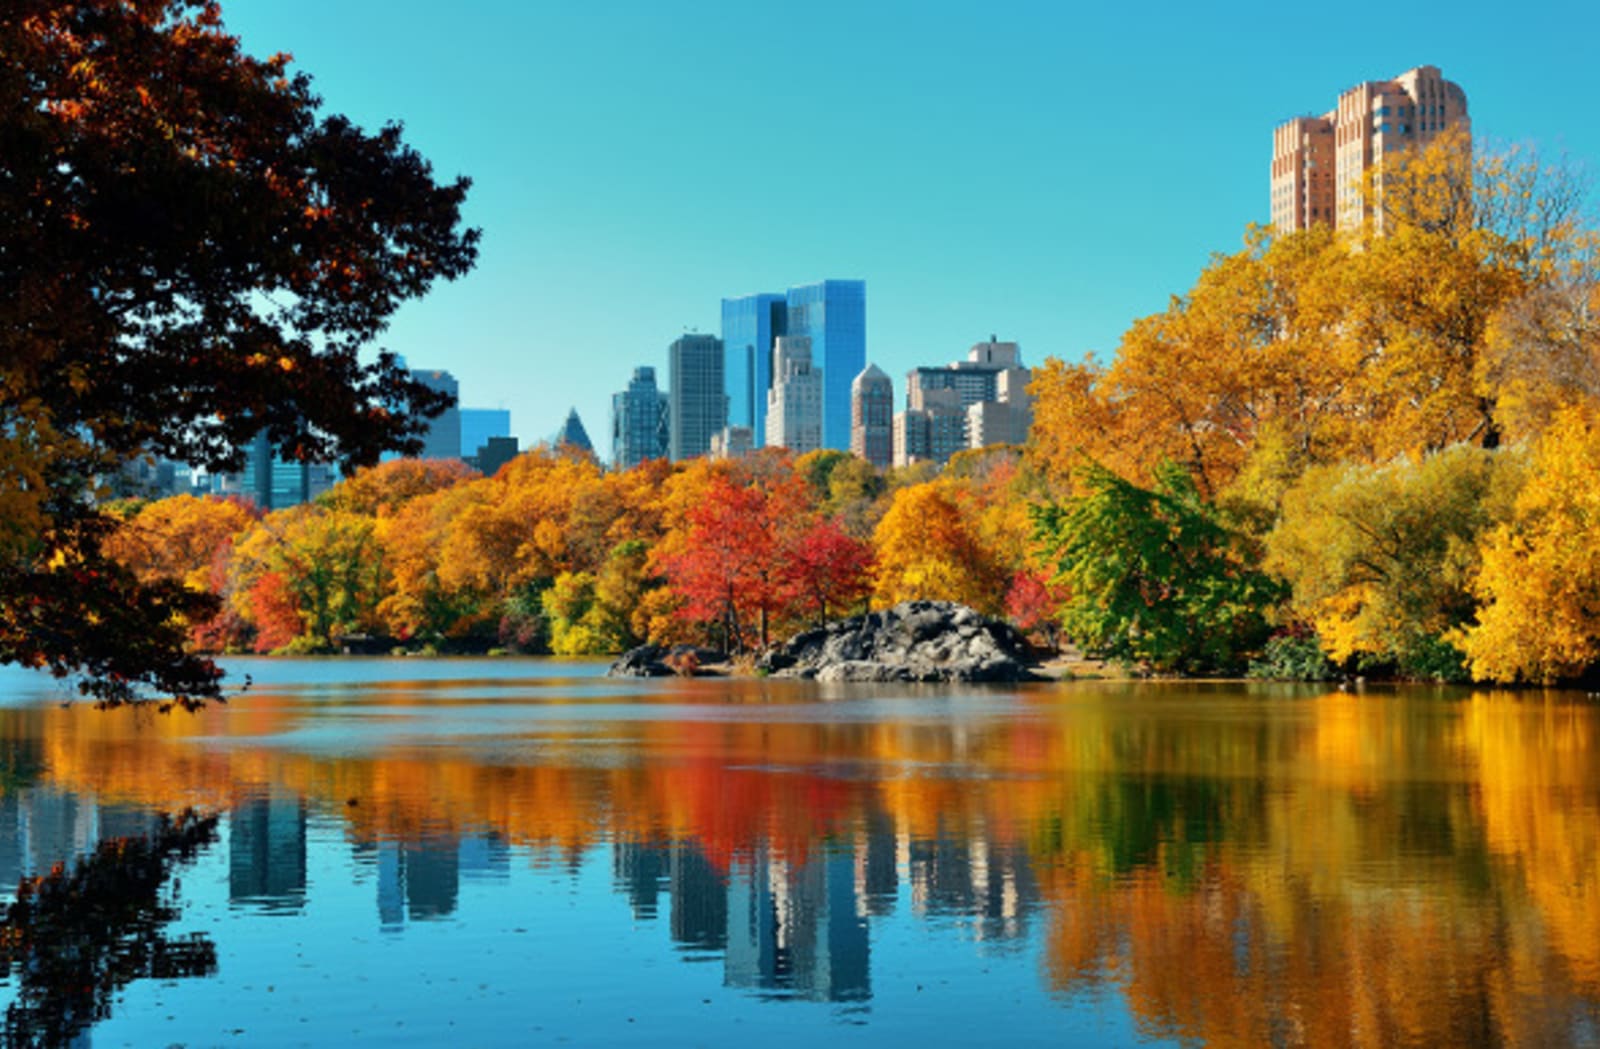 a lake in central park, reflecting a clear image of autumn trees and the city skyline